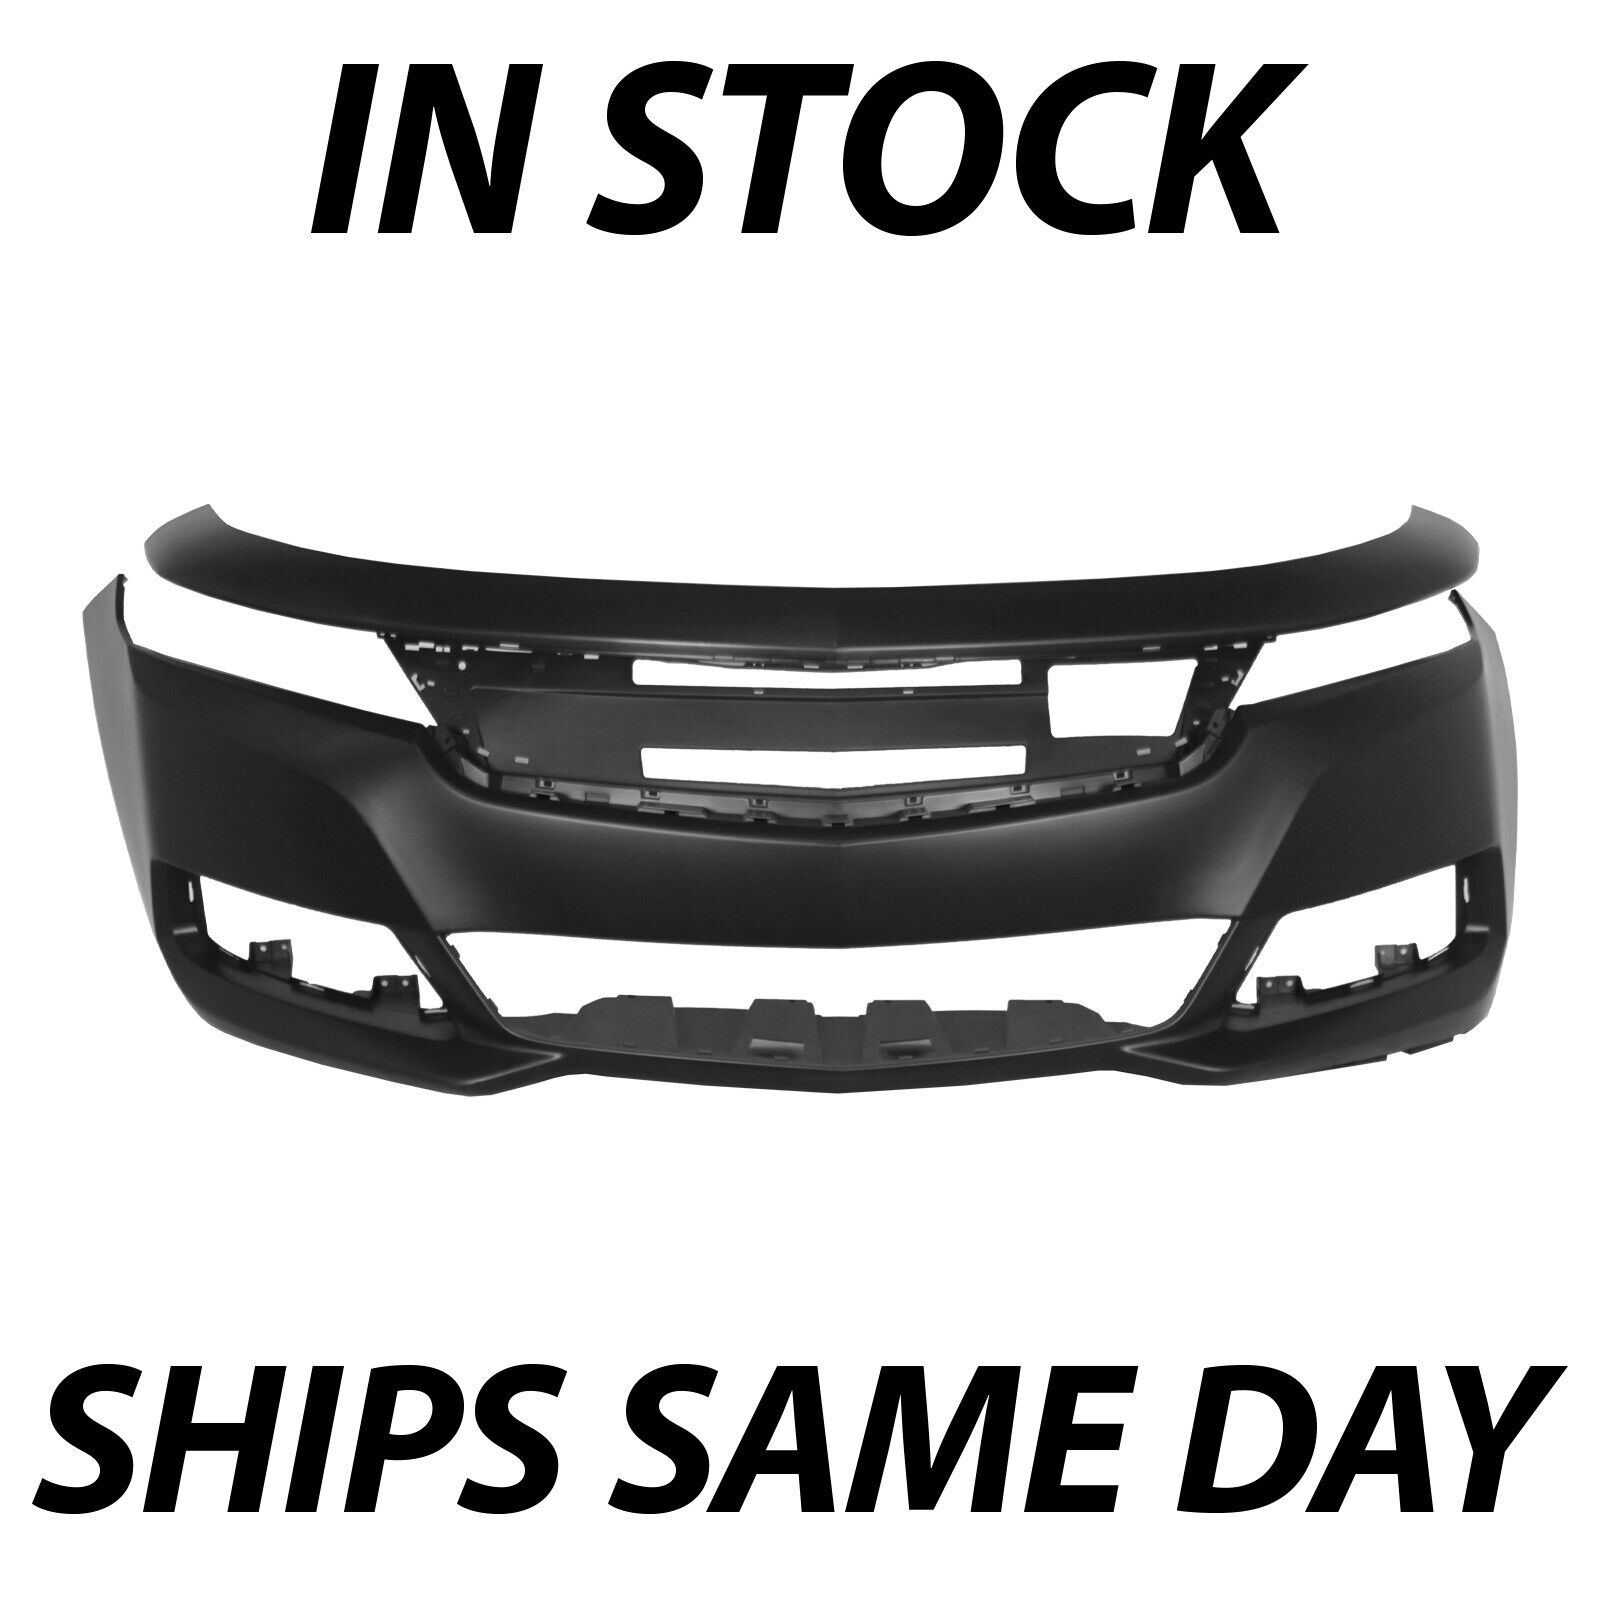 NEW Primered Front Bumper Cover Fascia Replacement for 2014-2020 Chevy Impala